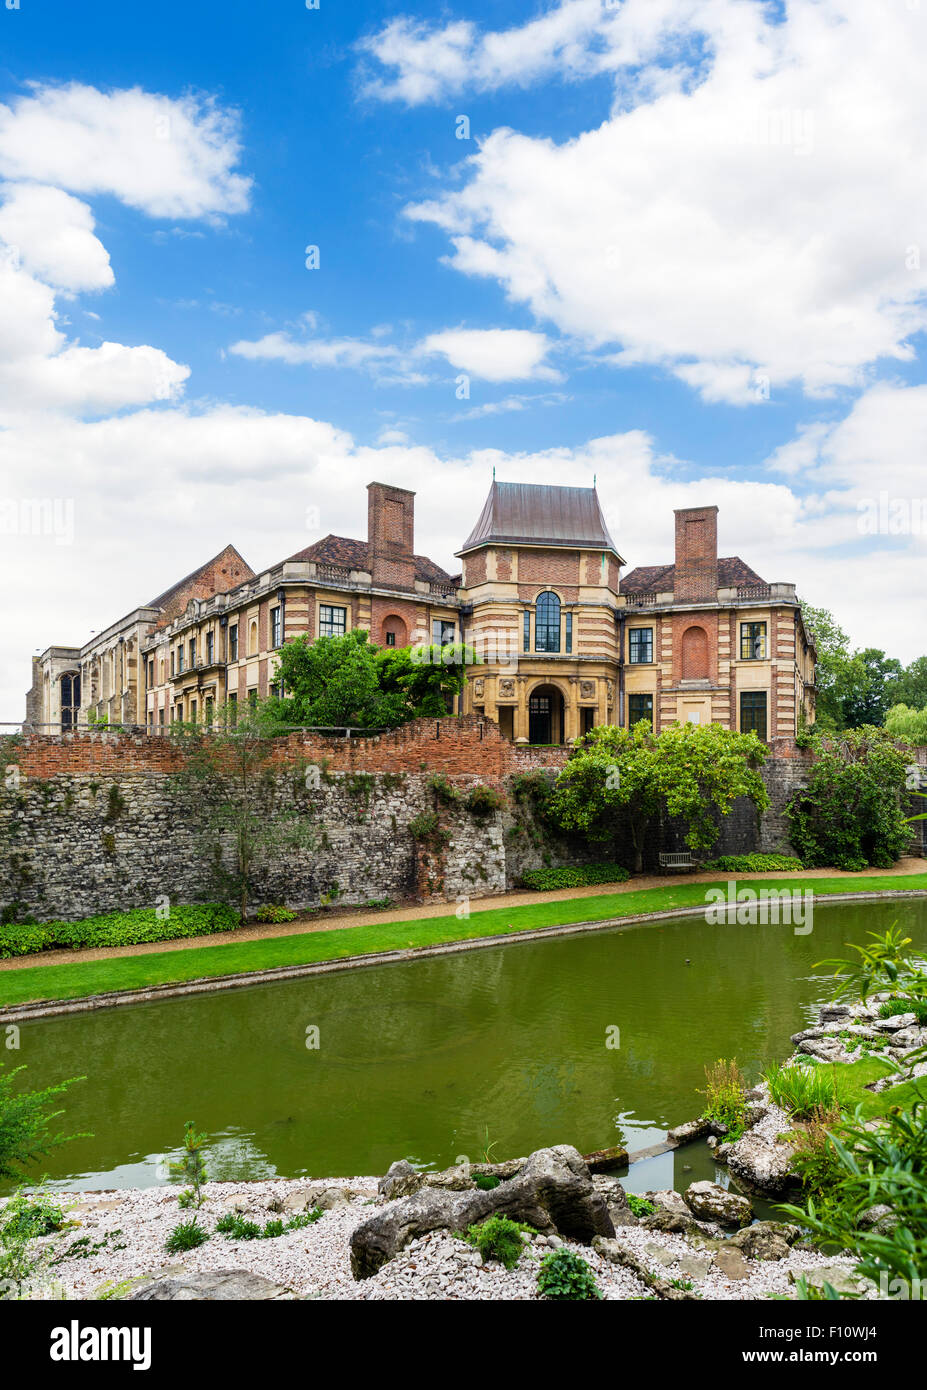 Eltham Palace, the former home of Stephen and Virginia Courtauld, viewed from the garden, Eltham, London, England, UK Stock Photo